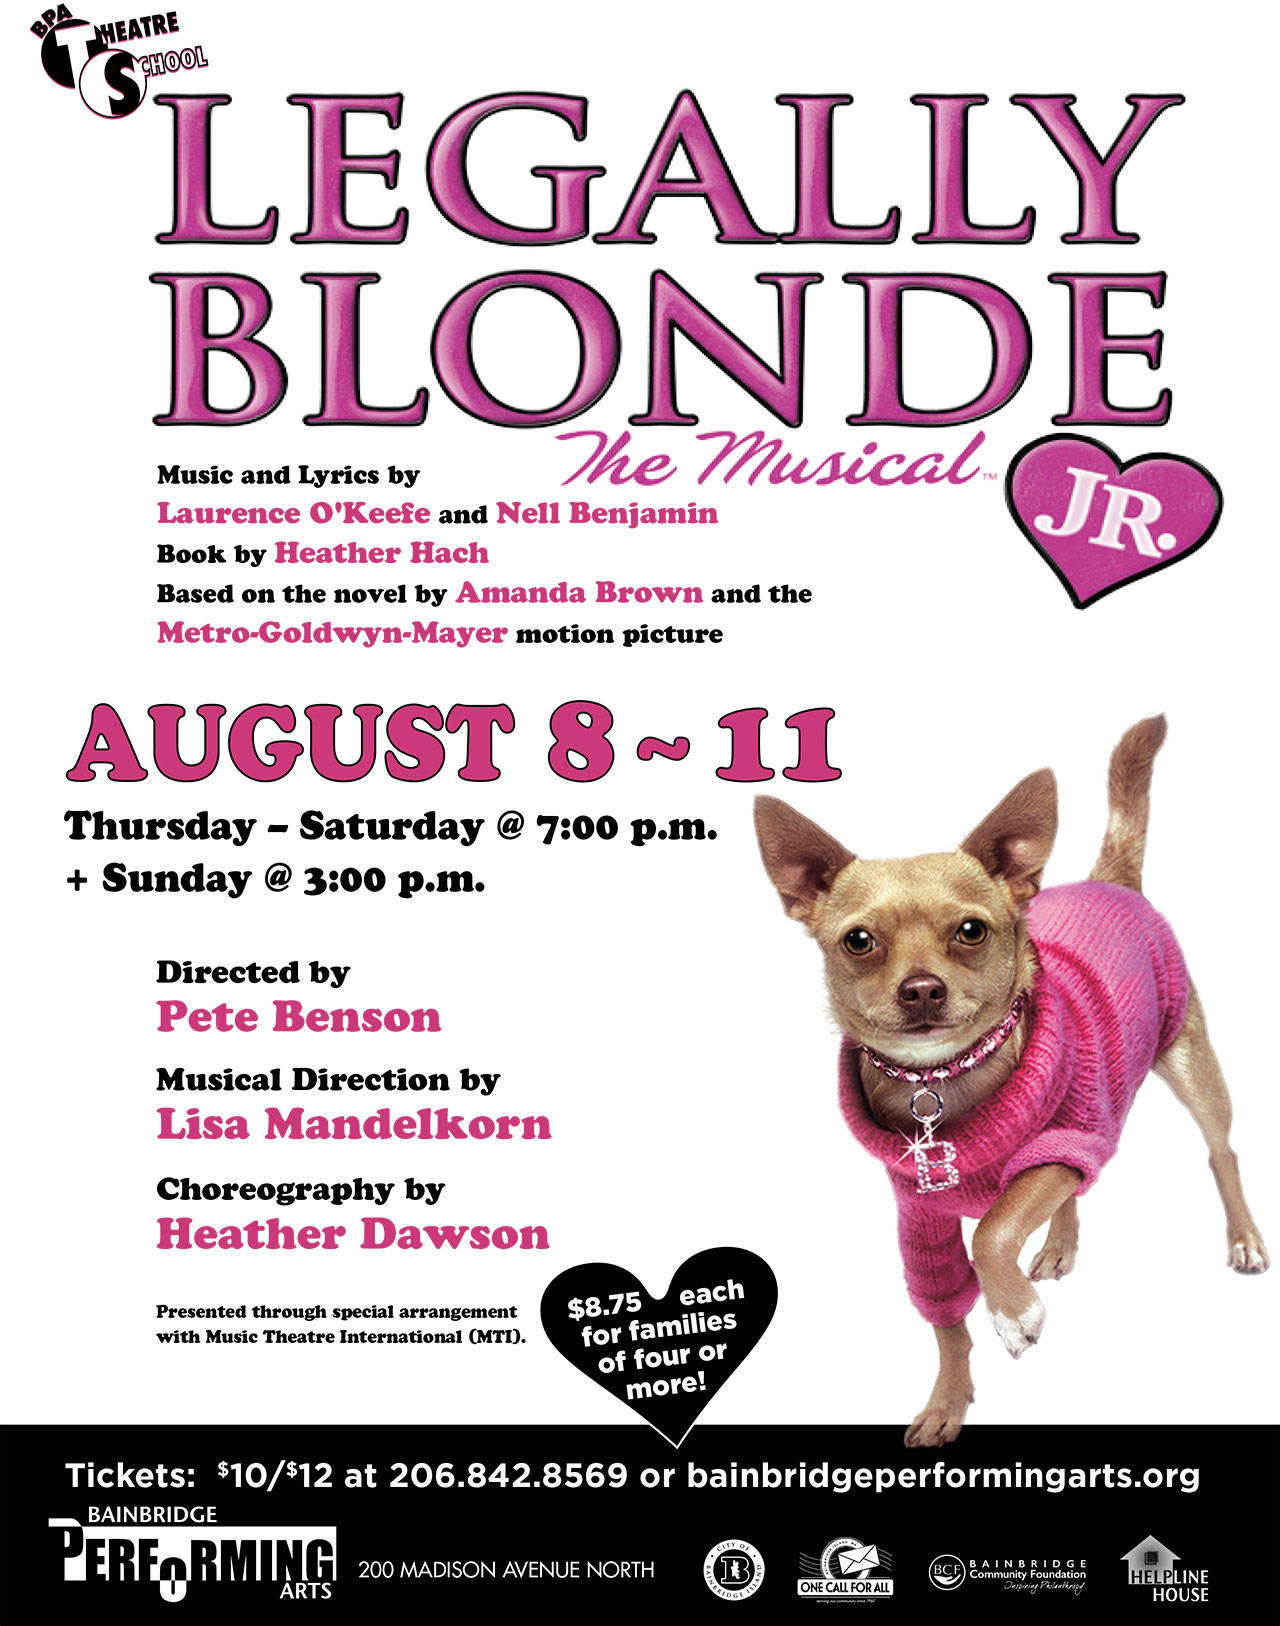 ‘Legally Blonde’ on stage at Bainbridge Performing Arts